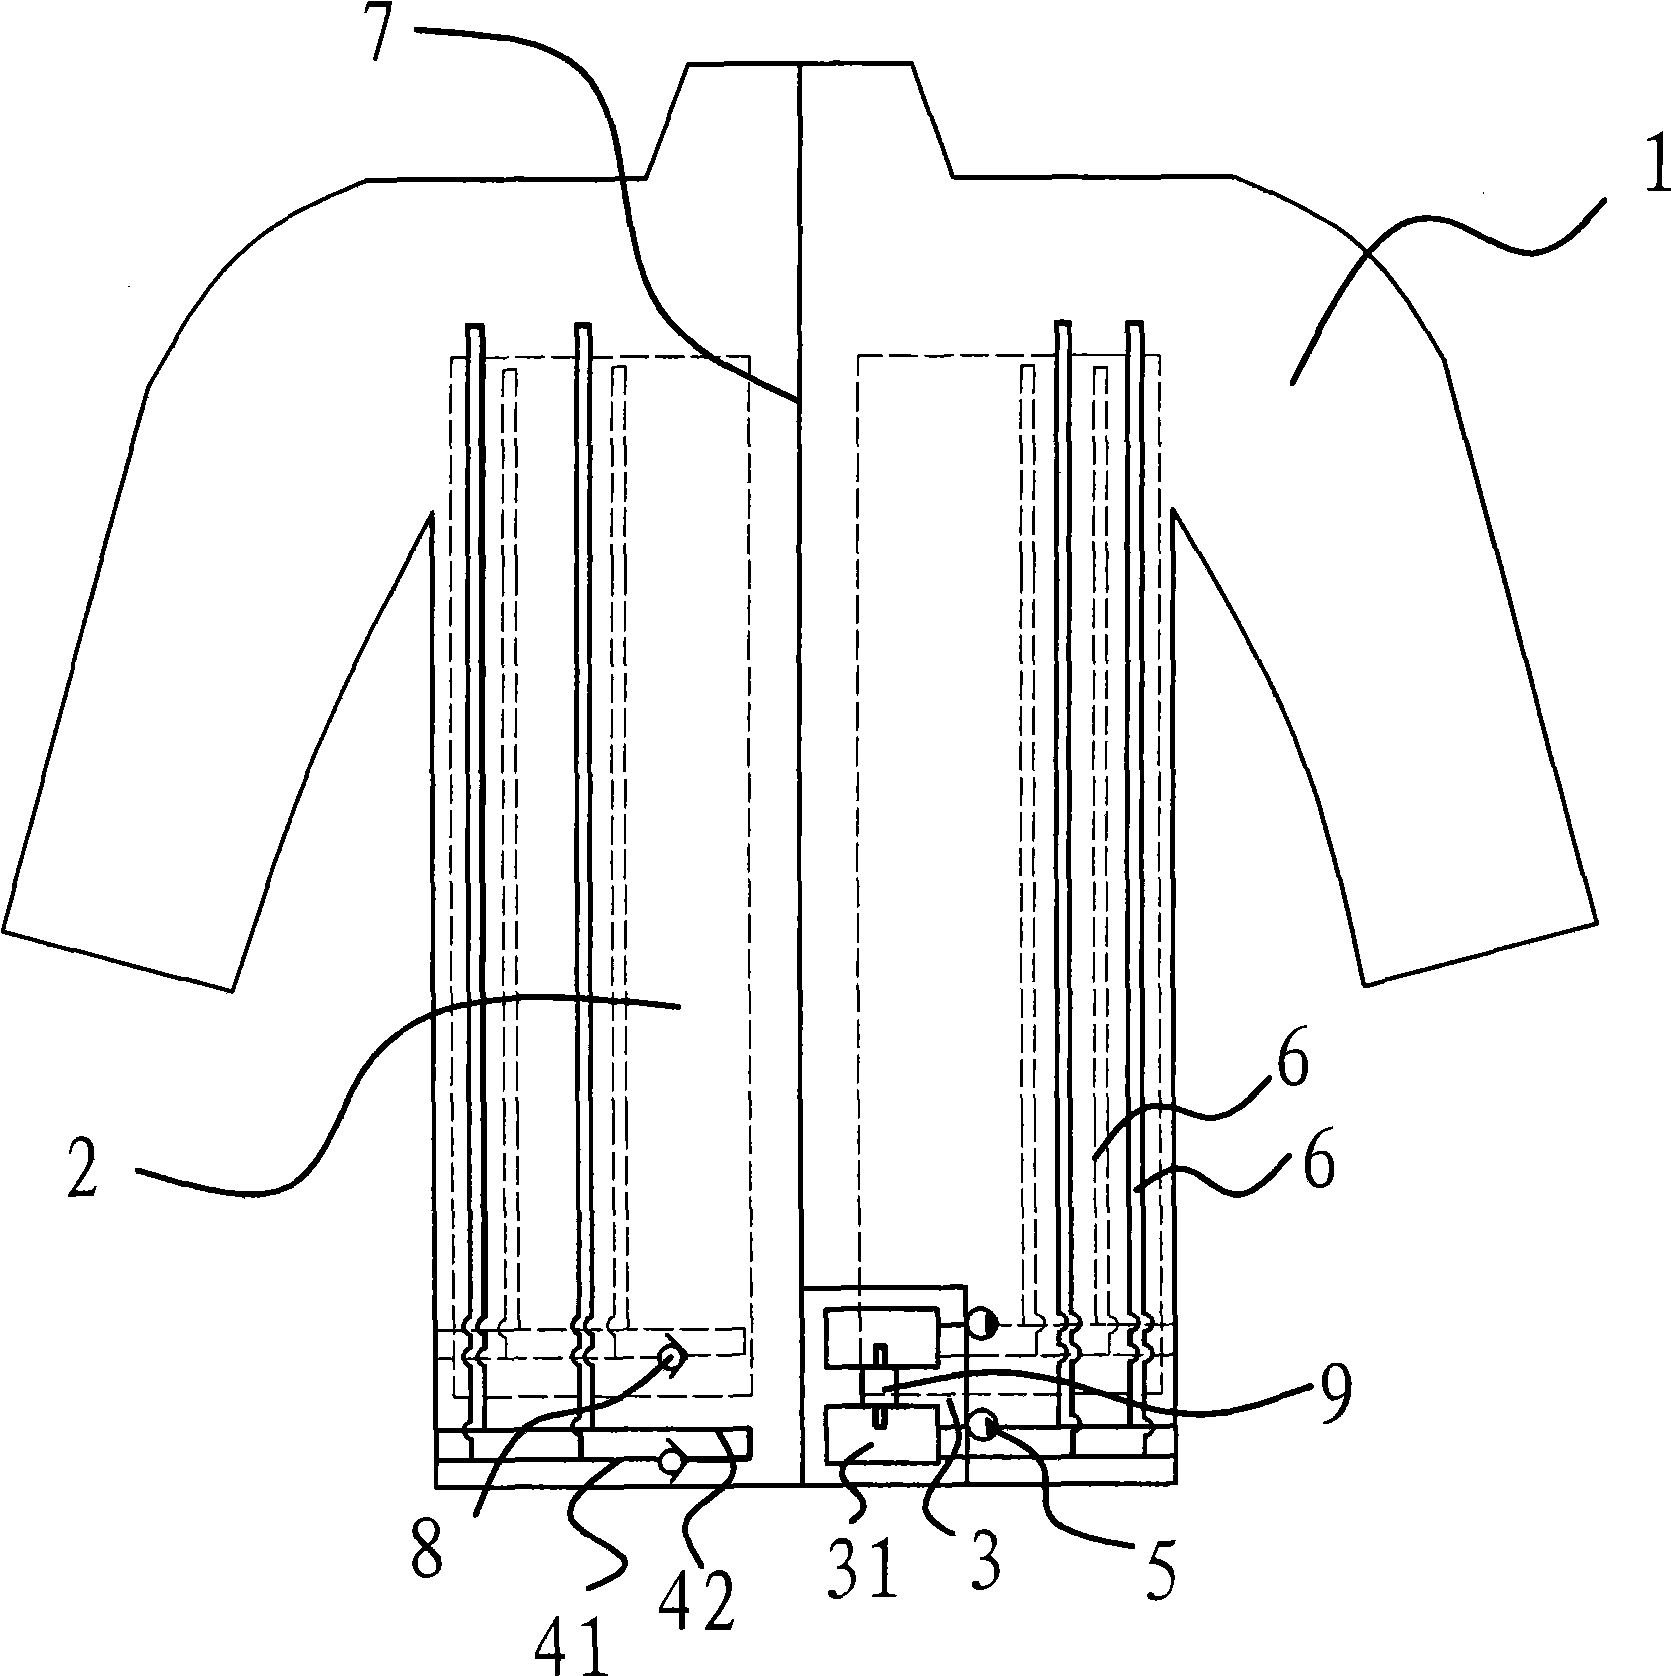 External temperature regulating device for thermal protection and heatstroke prevention